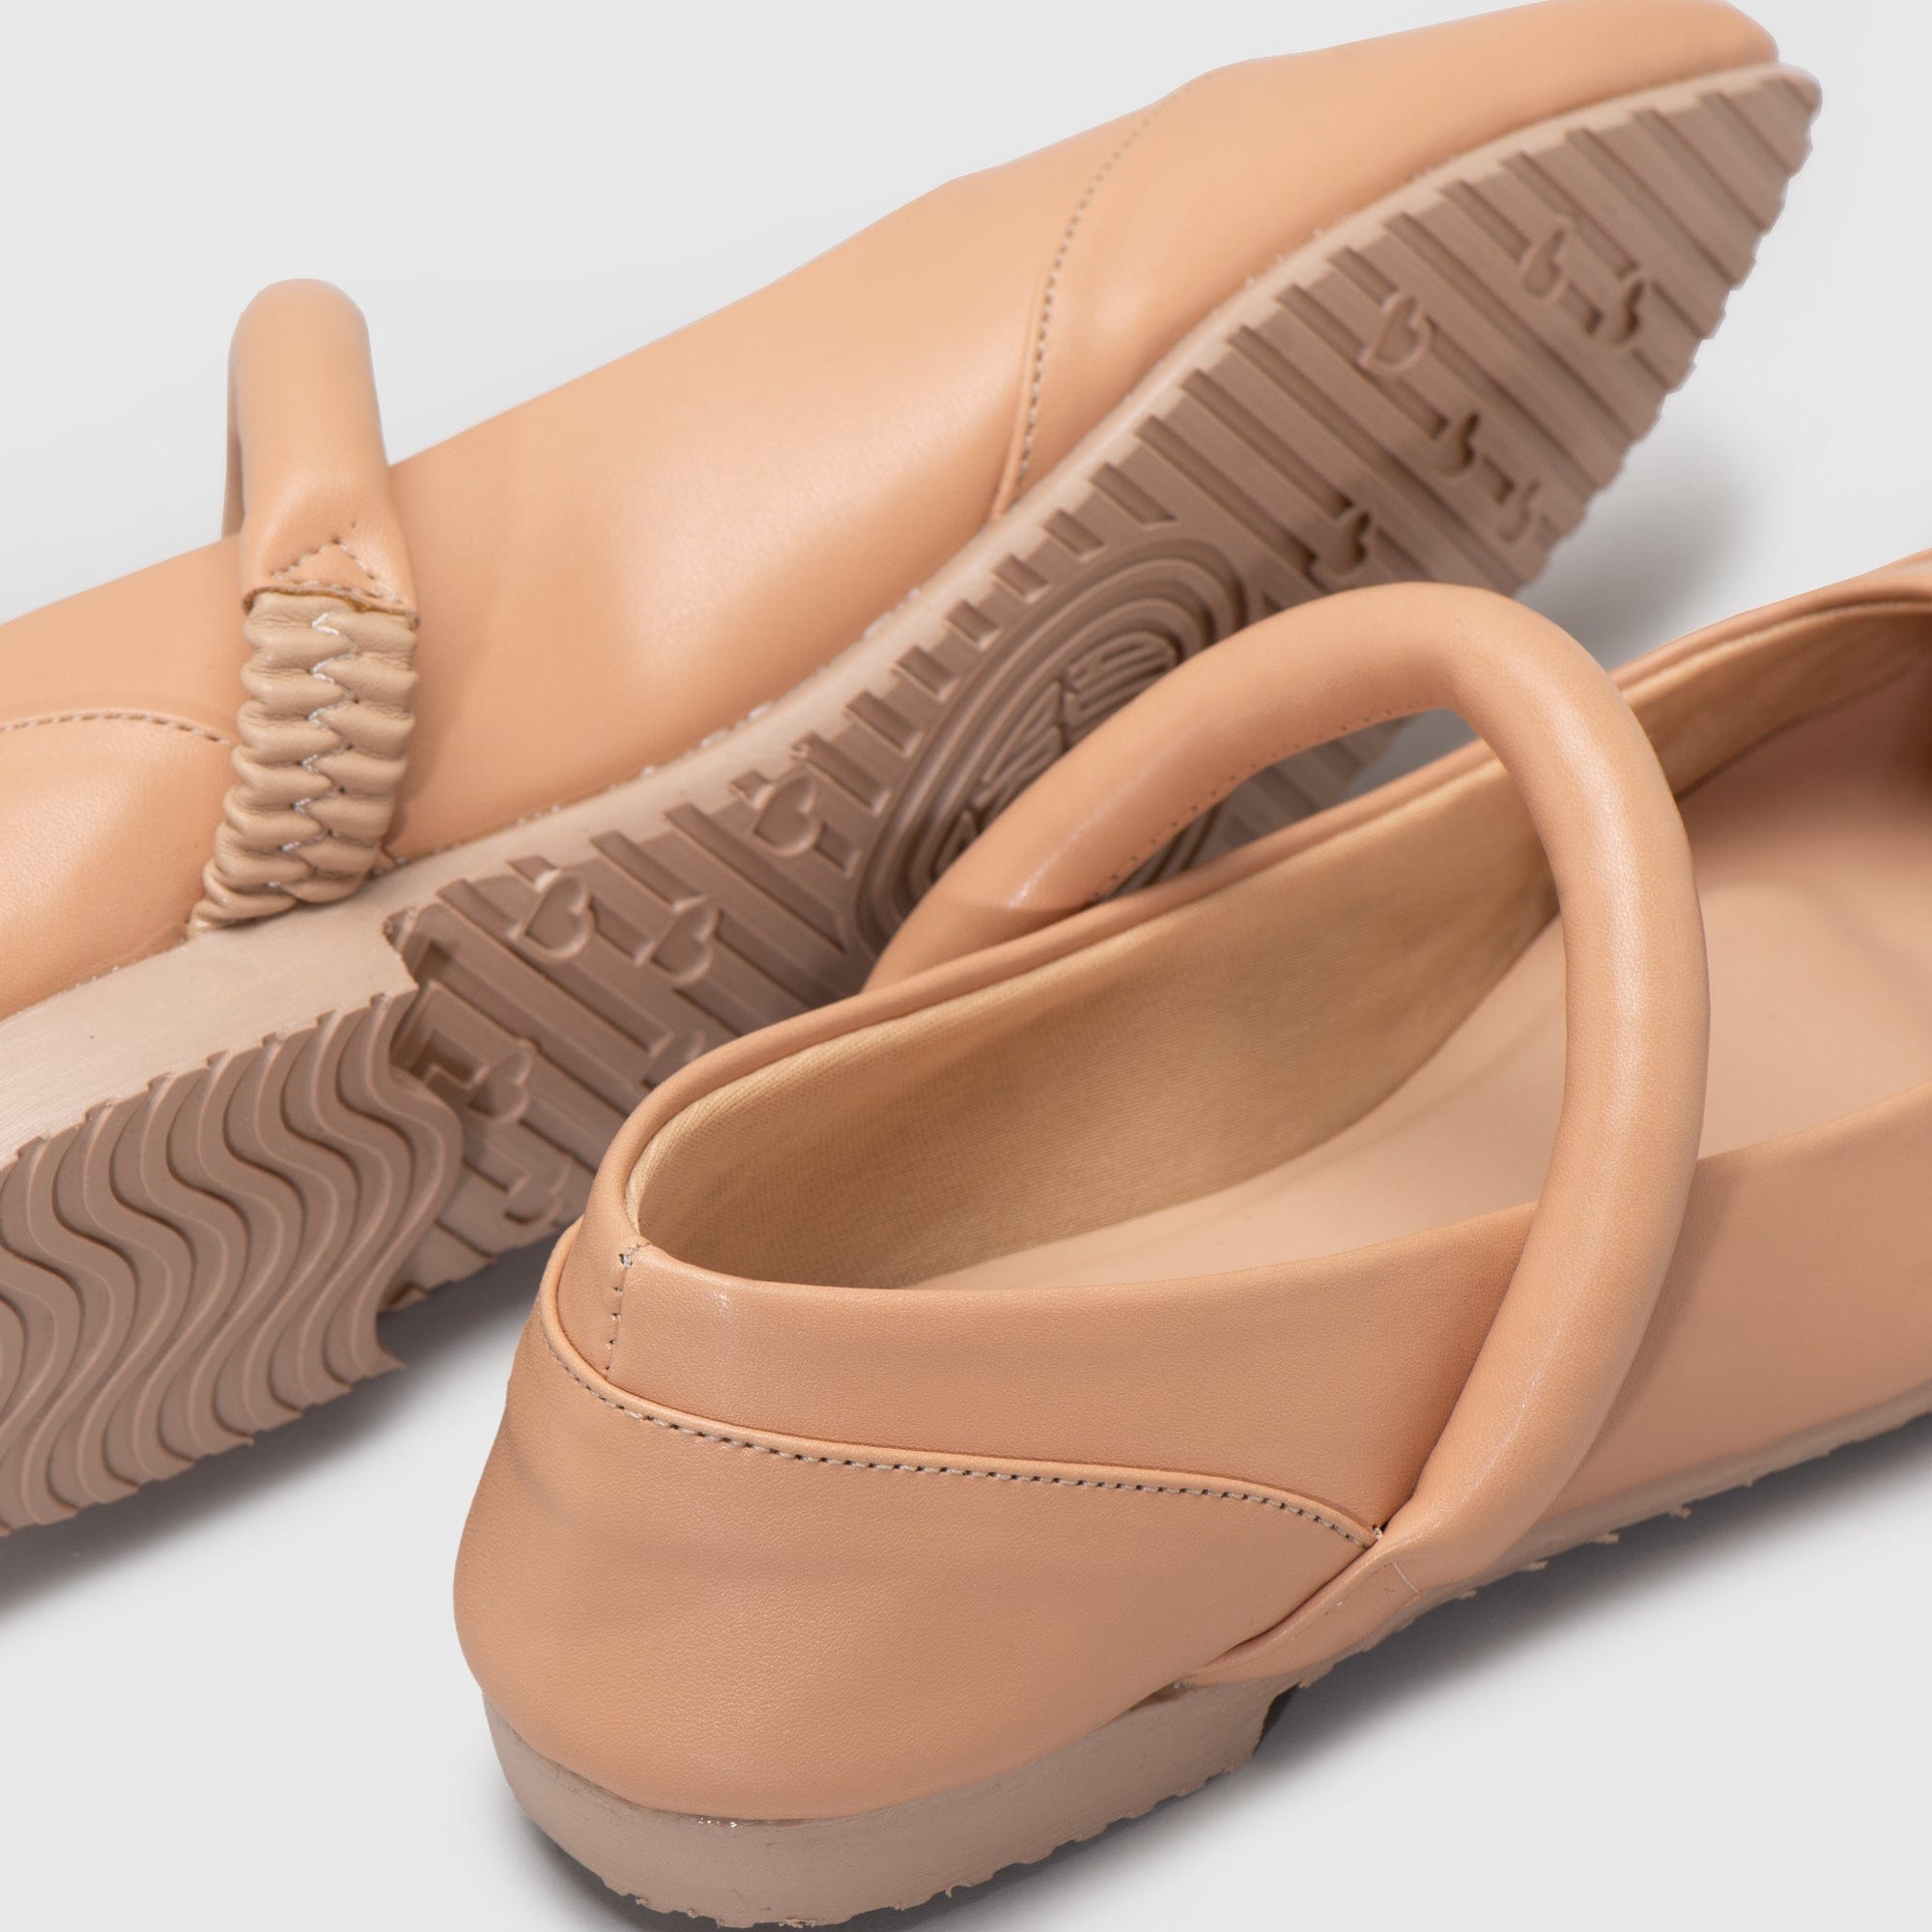 Adorable Projects Official Ballet Flatshoes Tiana Flat Shoes Nude